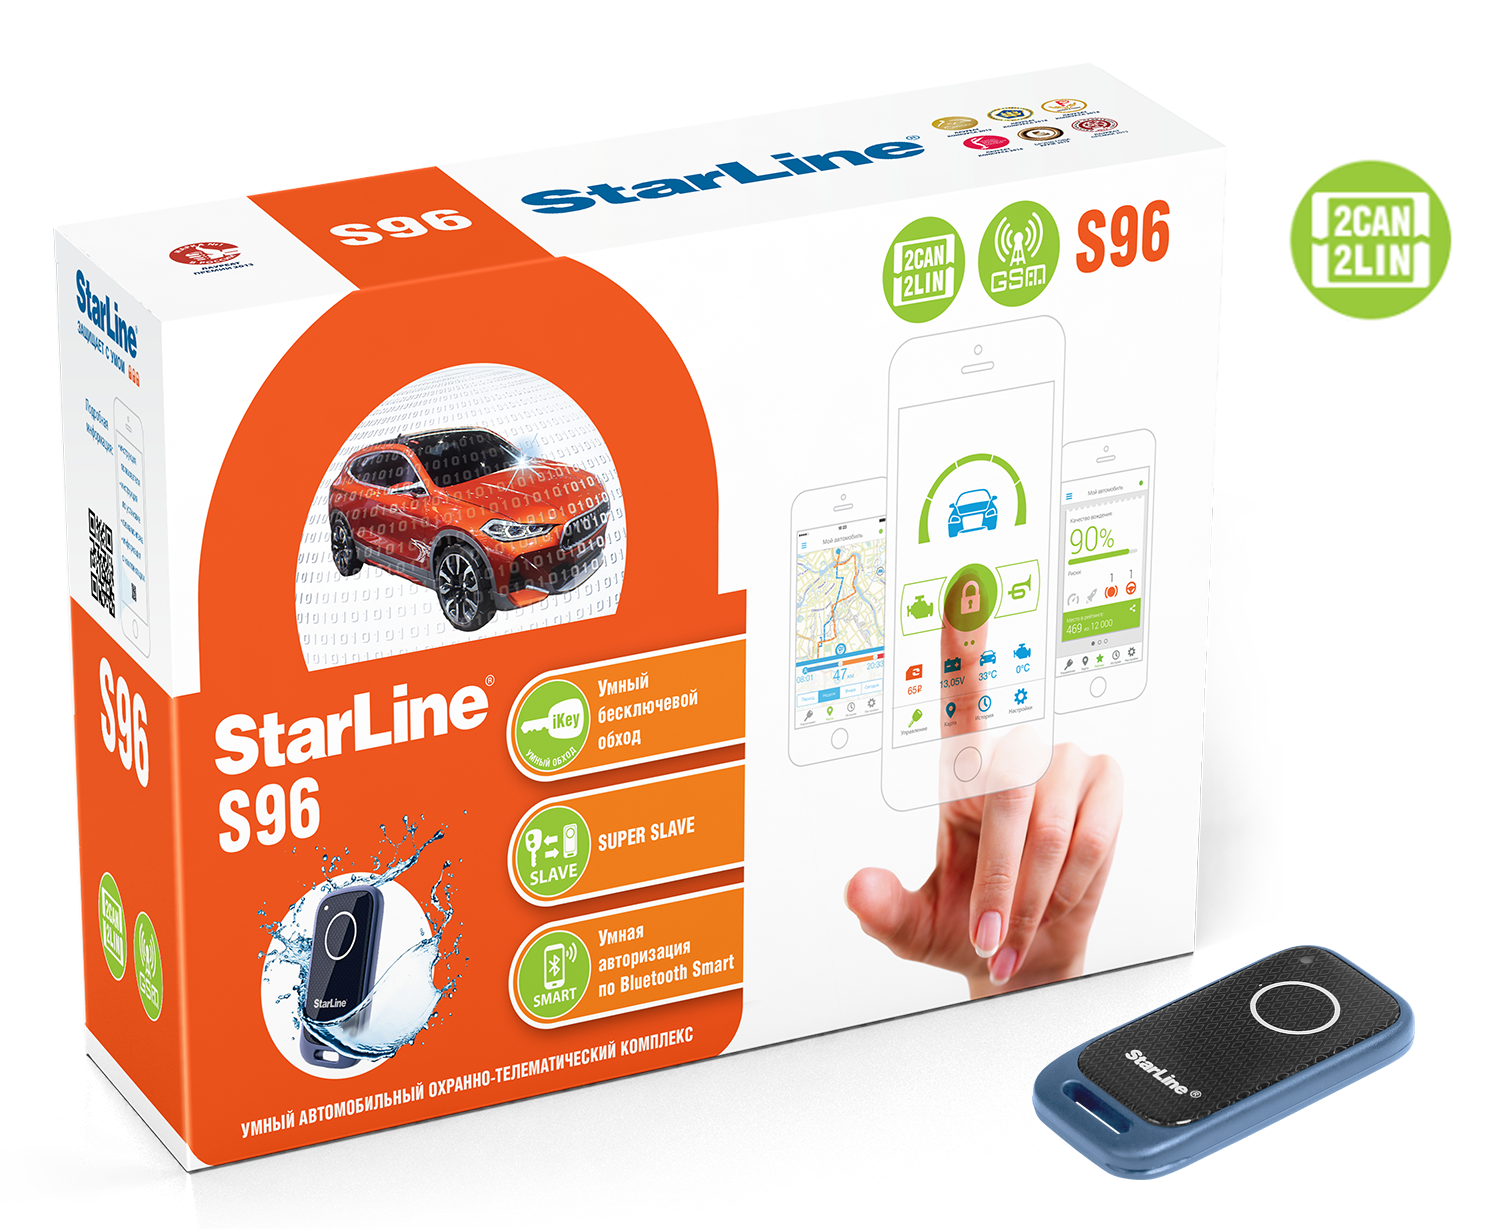 A93 2can gsm. STARLINE a93 Eco. Автосигнализация STARLINE a93 v2. STARLINE a63 2can+2lin Eco. Автосигнализация STARLINE a93 v2 GSM.